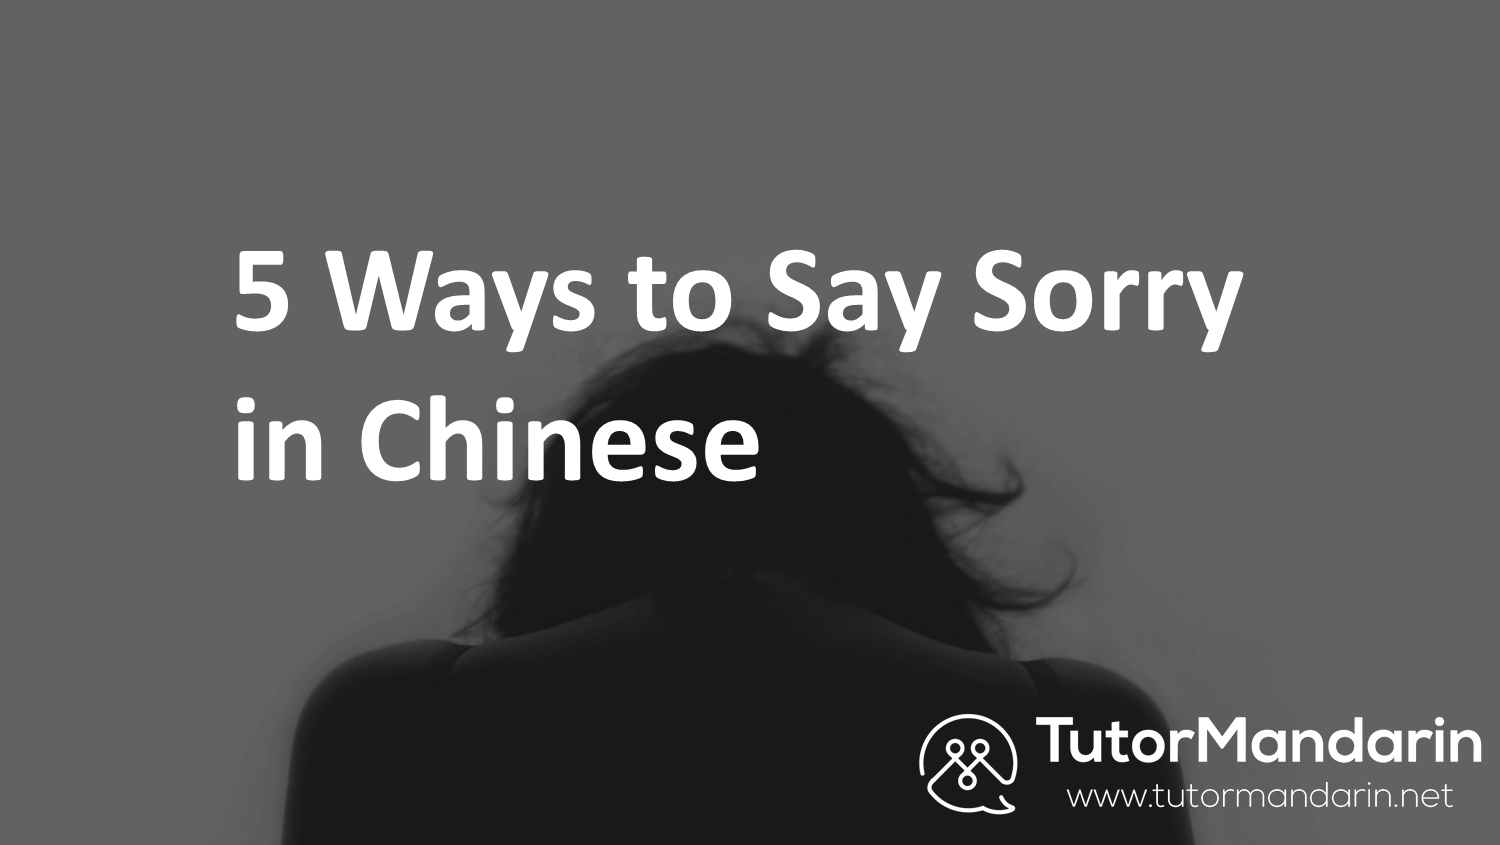 5 ways to say sorry in Chinese with tutormandarin 1-on1 online Chinese lesssons